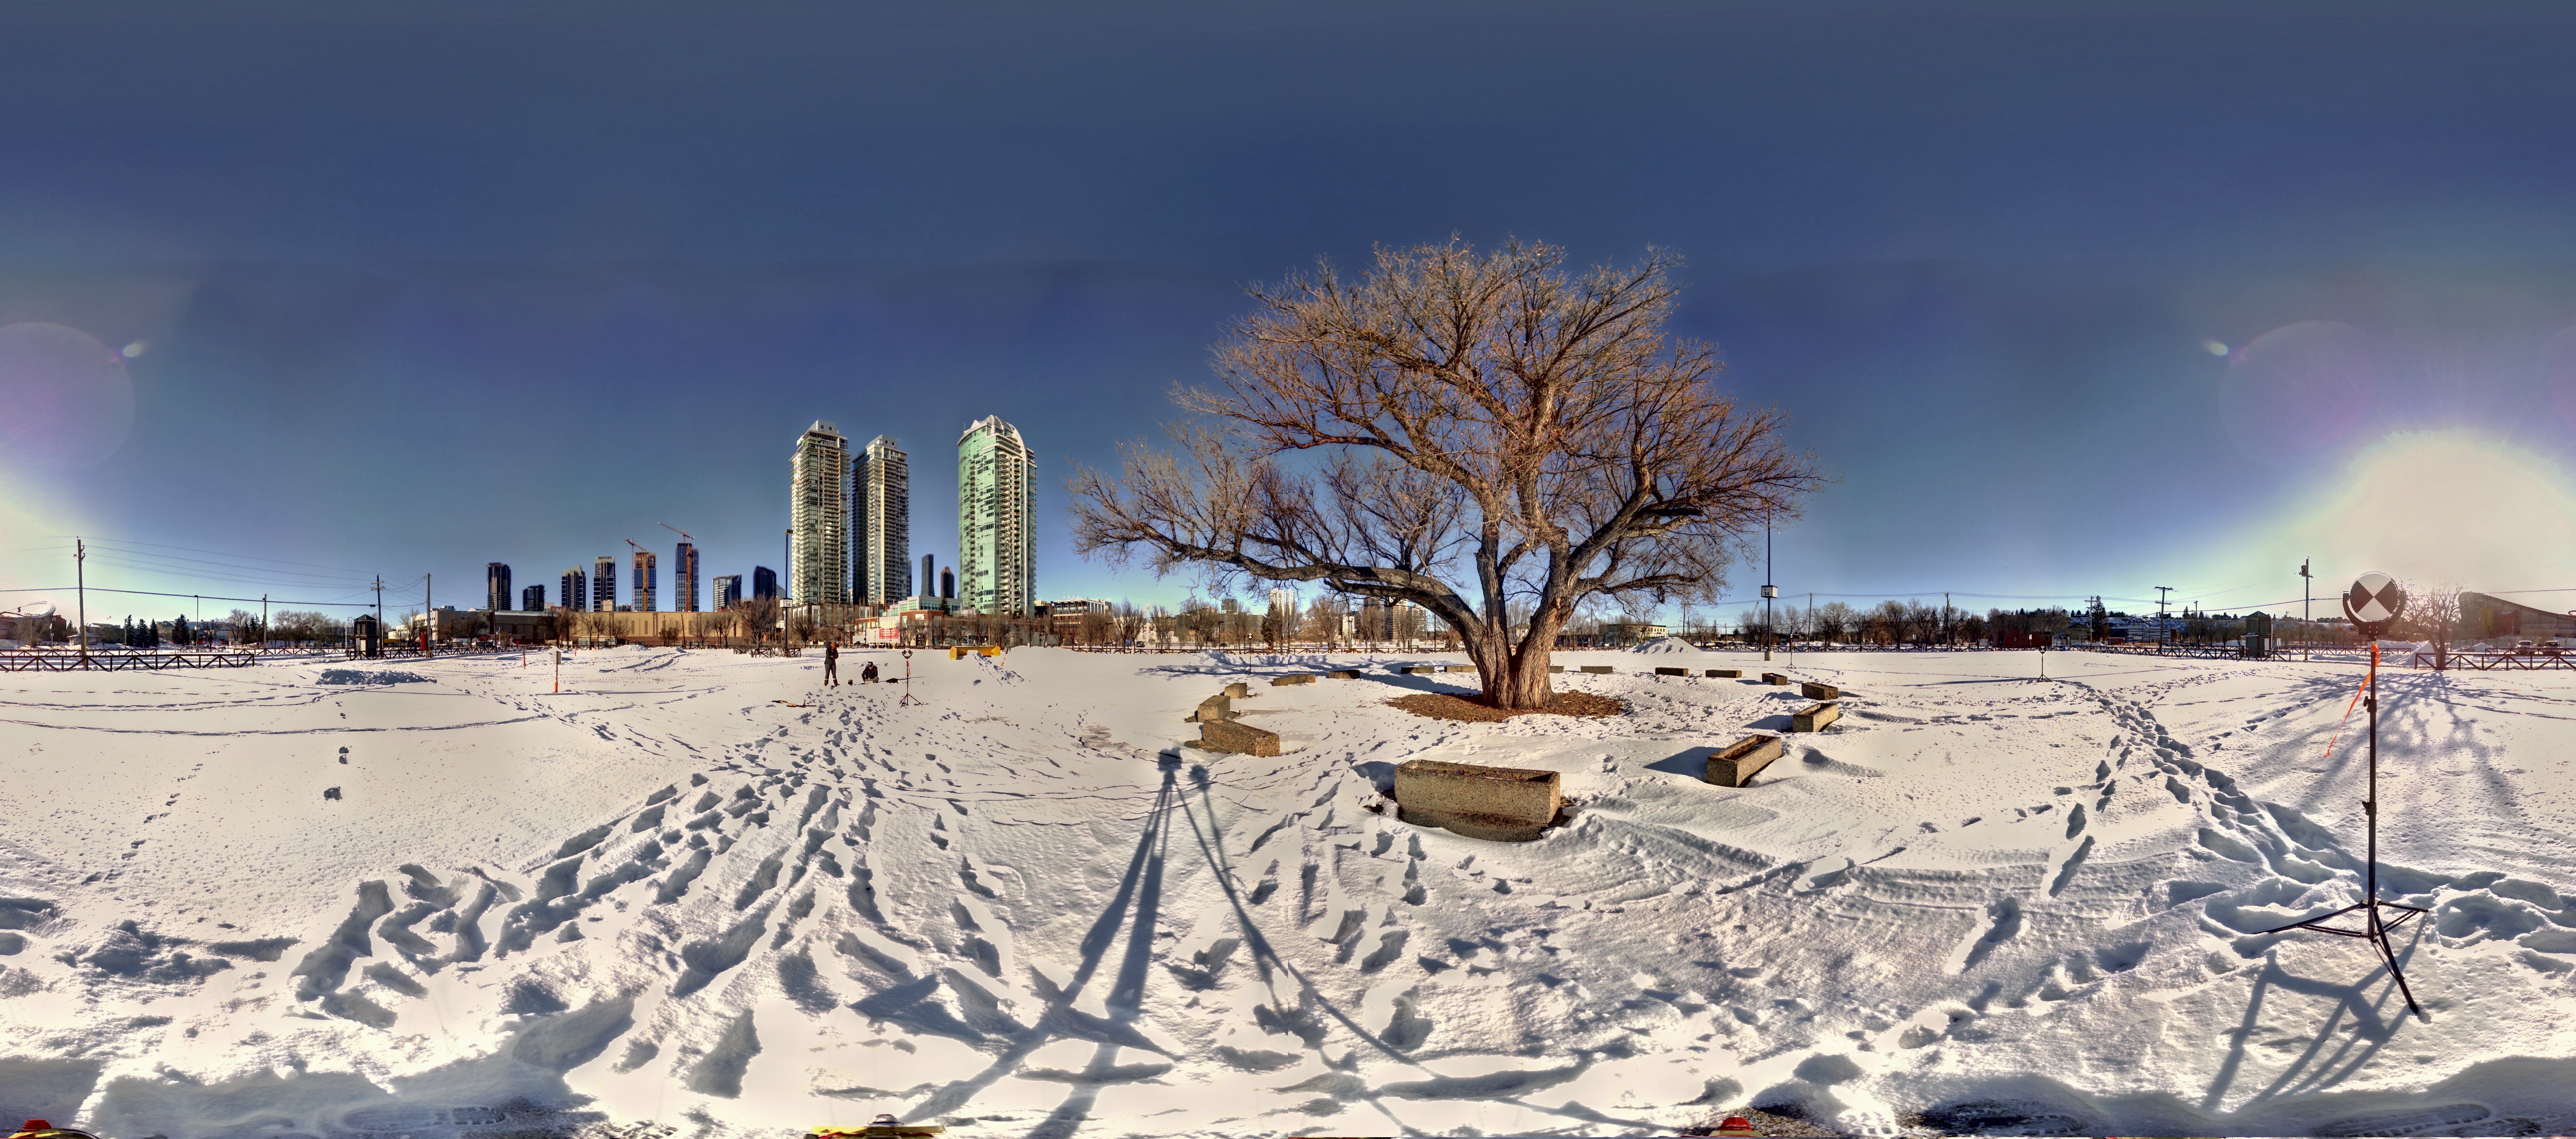 Panoramic view of the Stampede Elm and downtown Calgary from Z+F 5010X laser scanner, scanning location 6